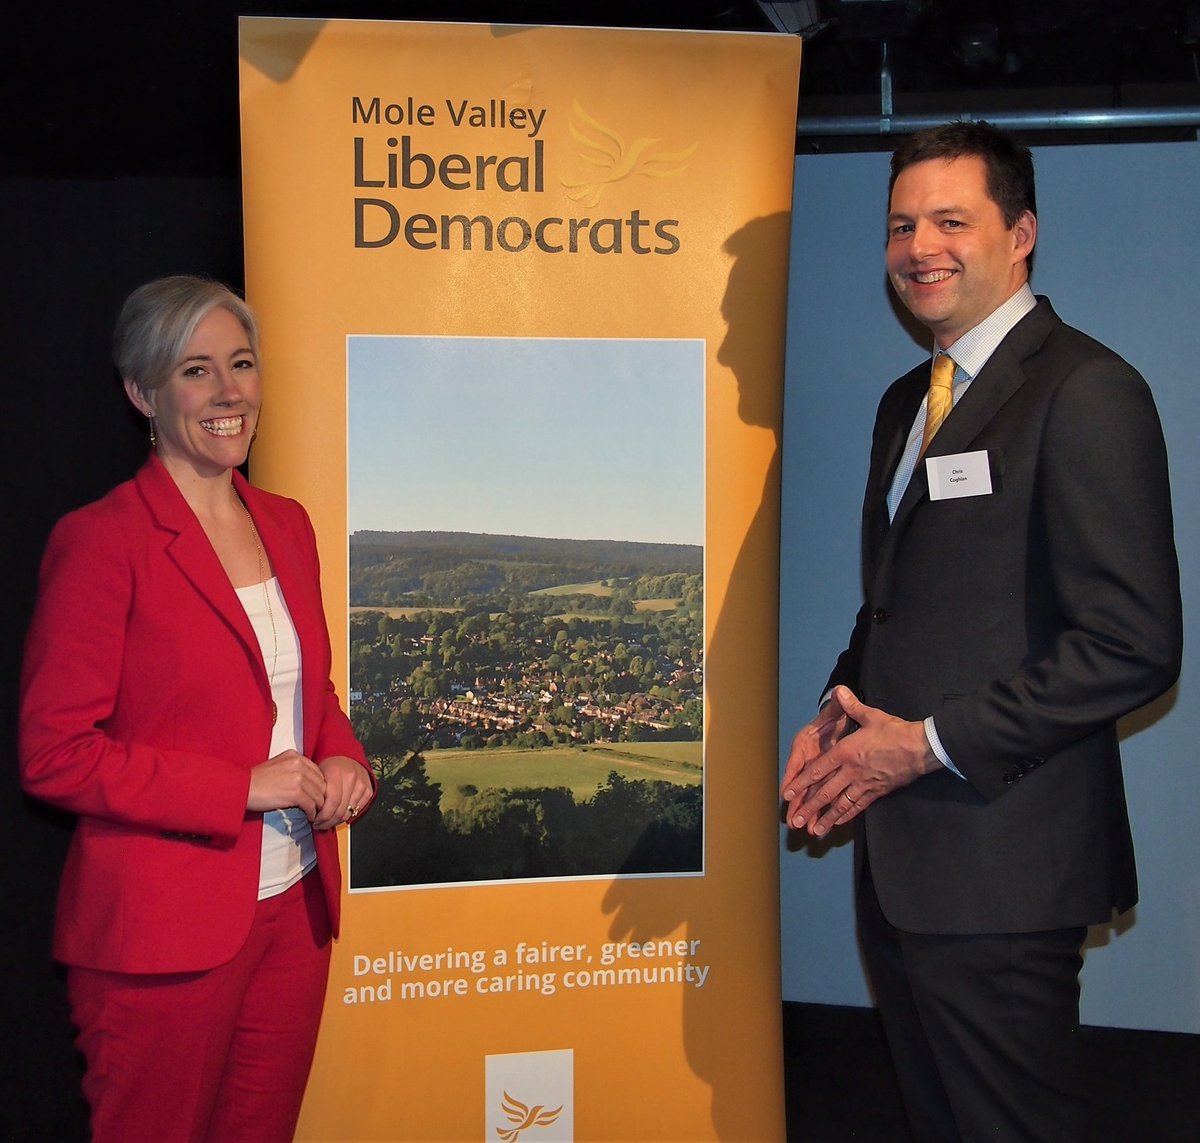 Chris Coghlan @_Chris_Coghlan the next MP for #Dorking & #Horley with Daisy Cooper @libdemdaisy 
in Mole Valley.

People want change & see Chris and @LibDems
 as being the best to deliver that.    

#ToriesOut #GeneralElection #VoteLibDem